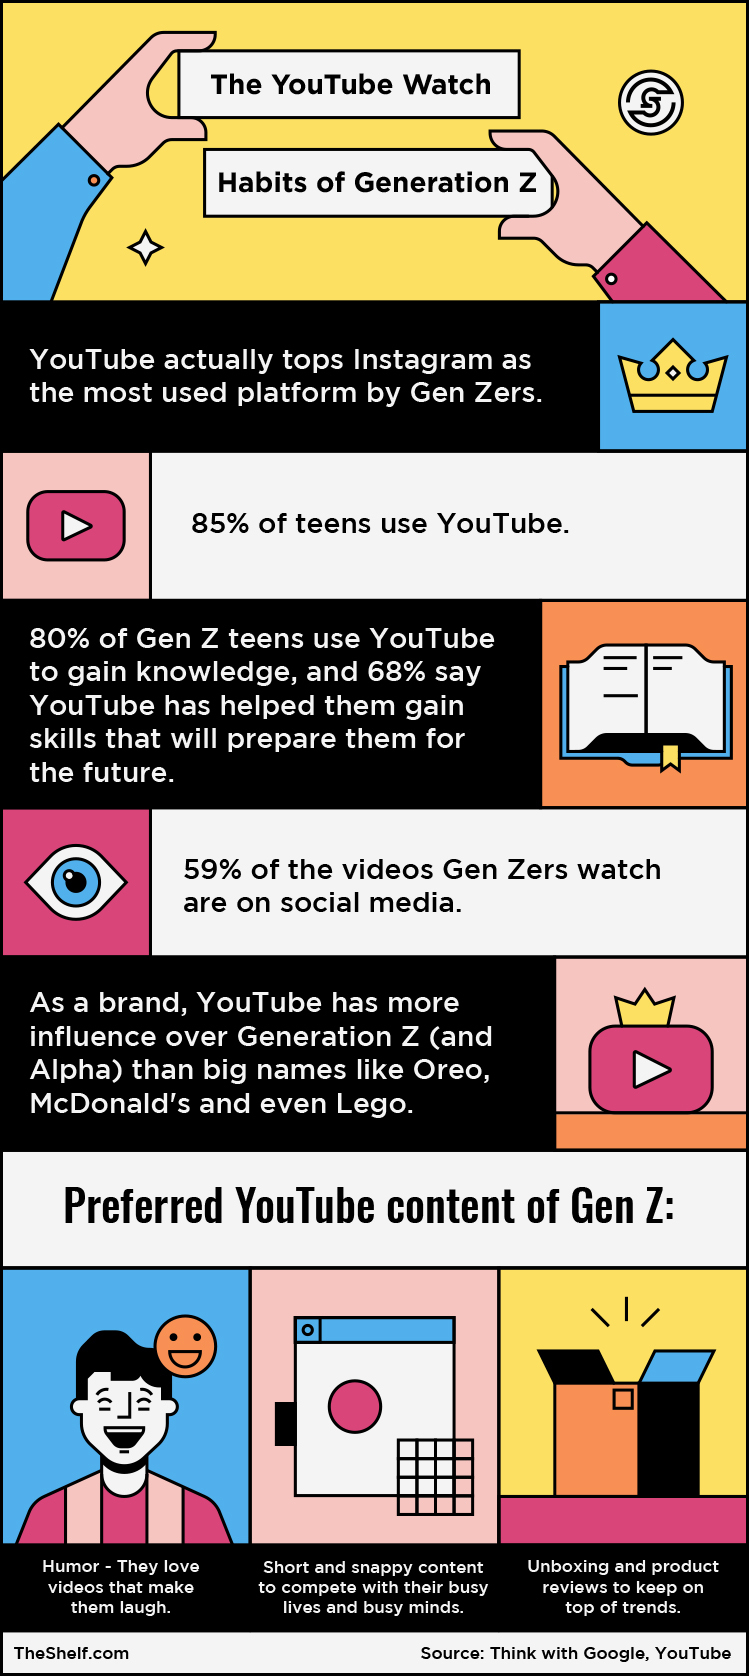 Infographic image on YouTube watch habits of Generation Z. 